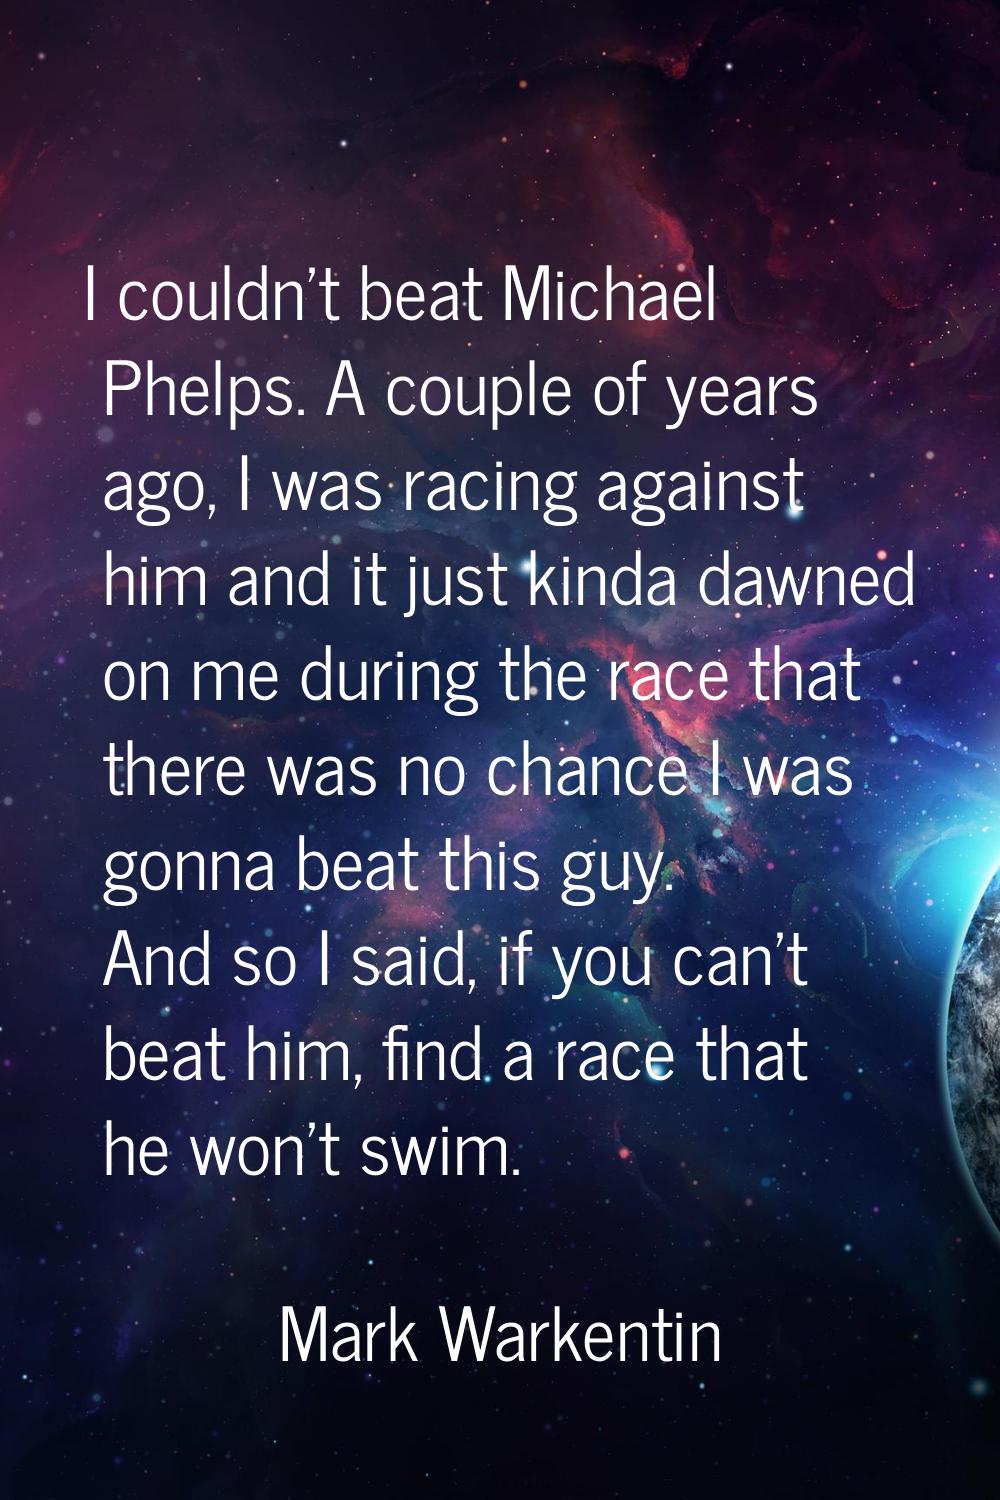 I couldn't beat Michael Phelps. A couple of years ago, I was racing against him and it just kinda d